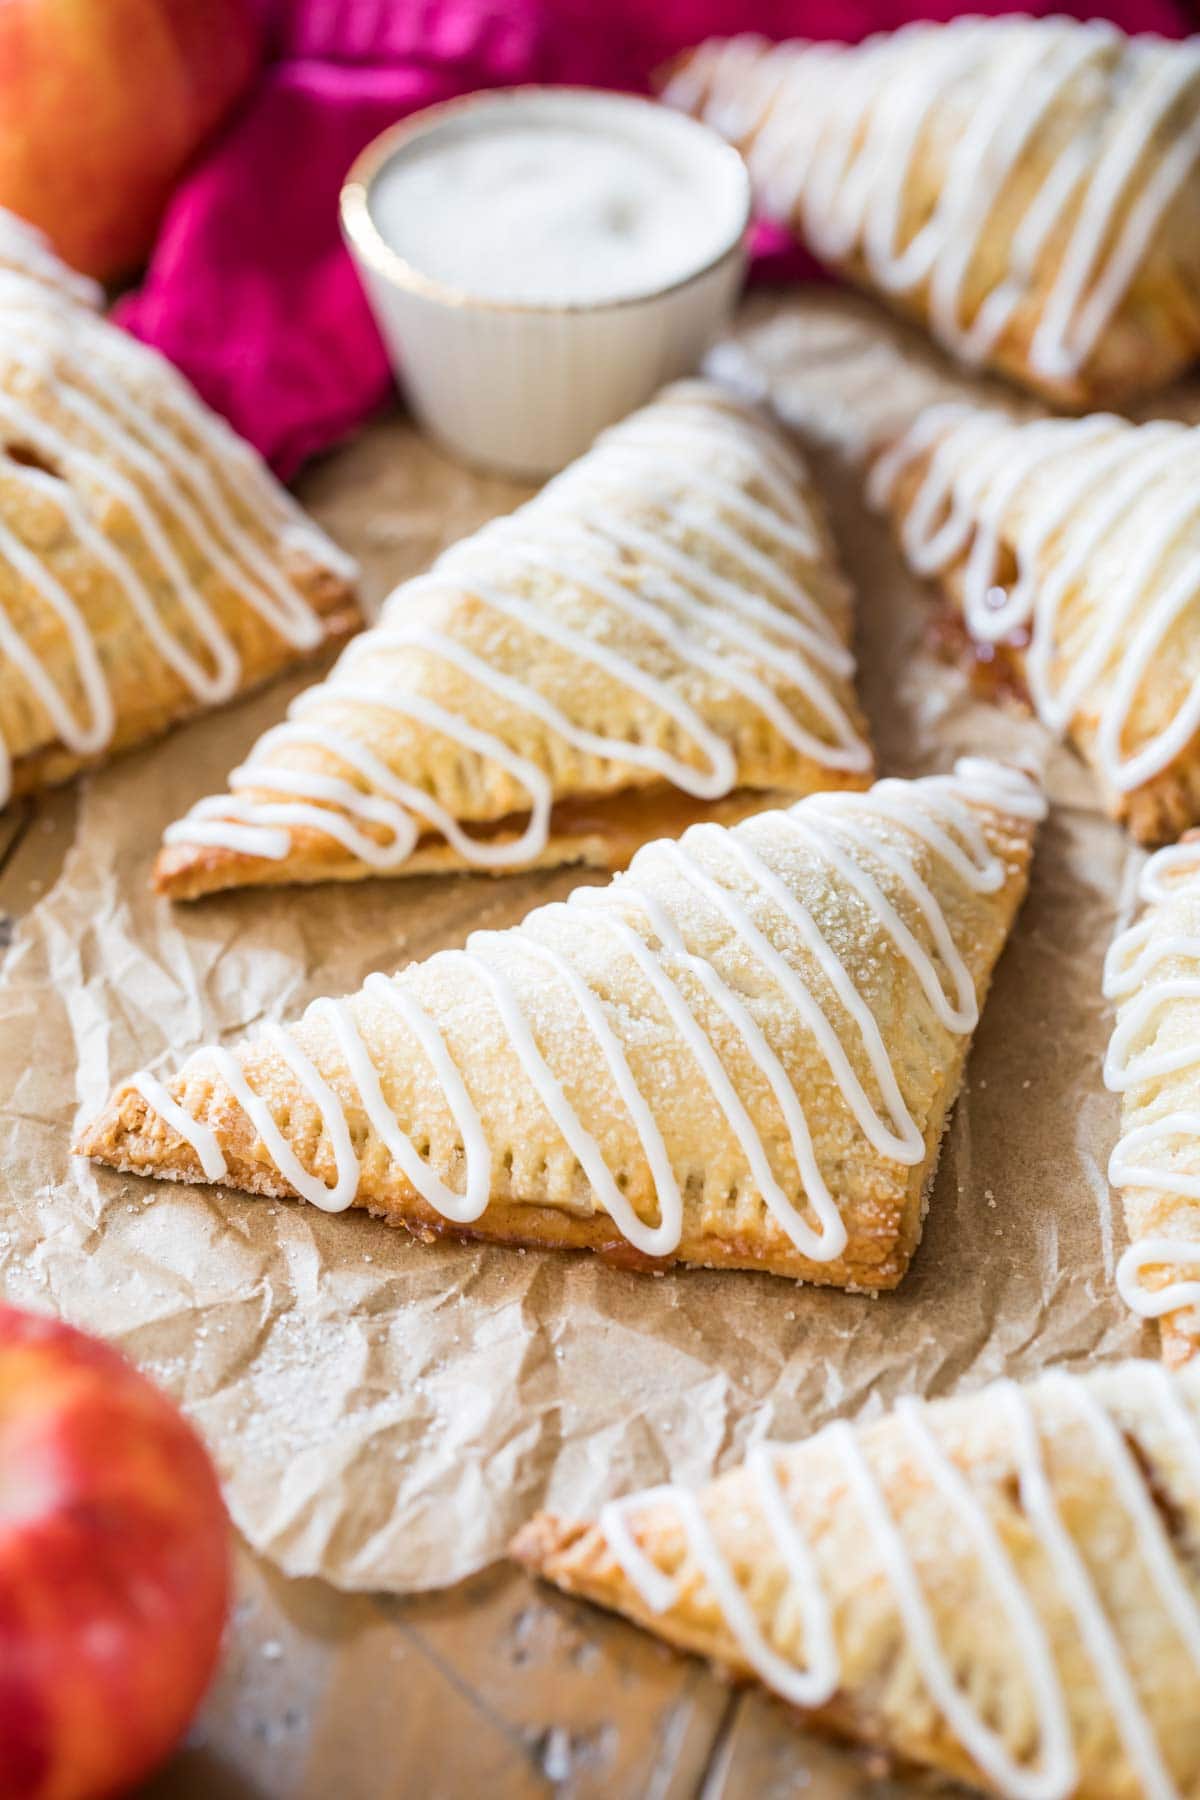 triangular-shaped pastries drizzled with white glaze